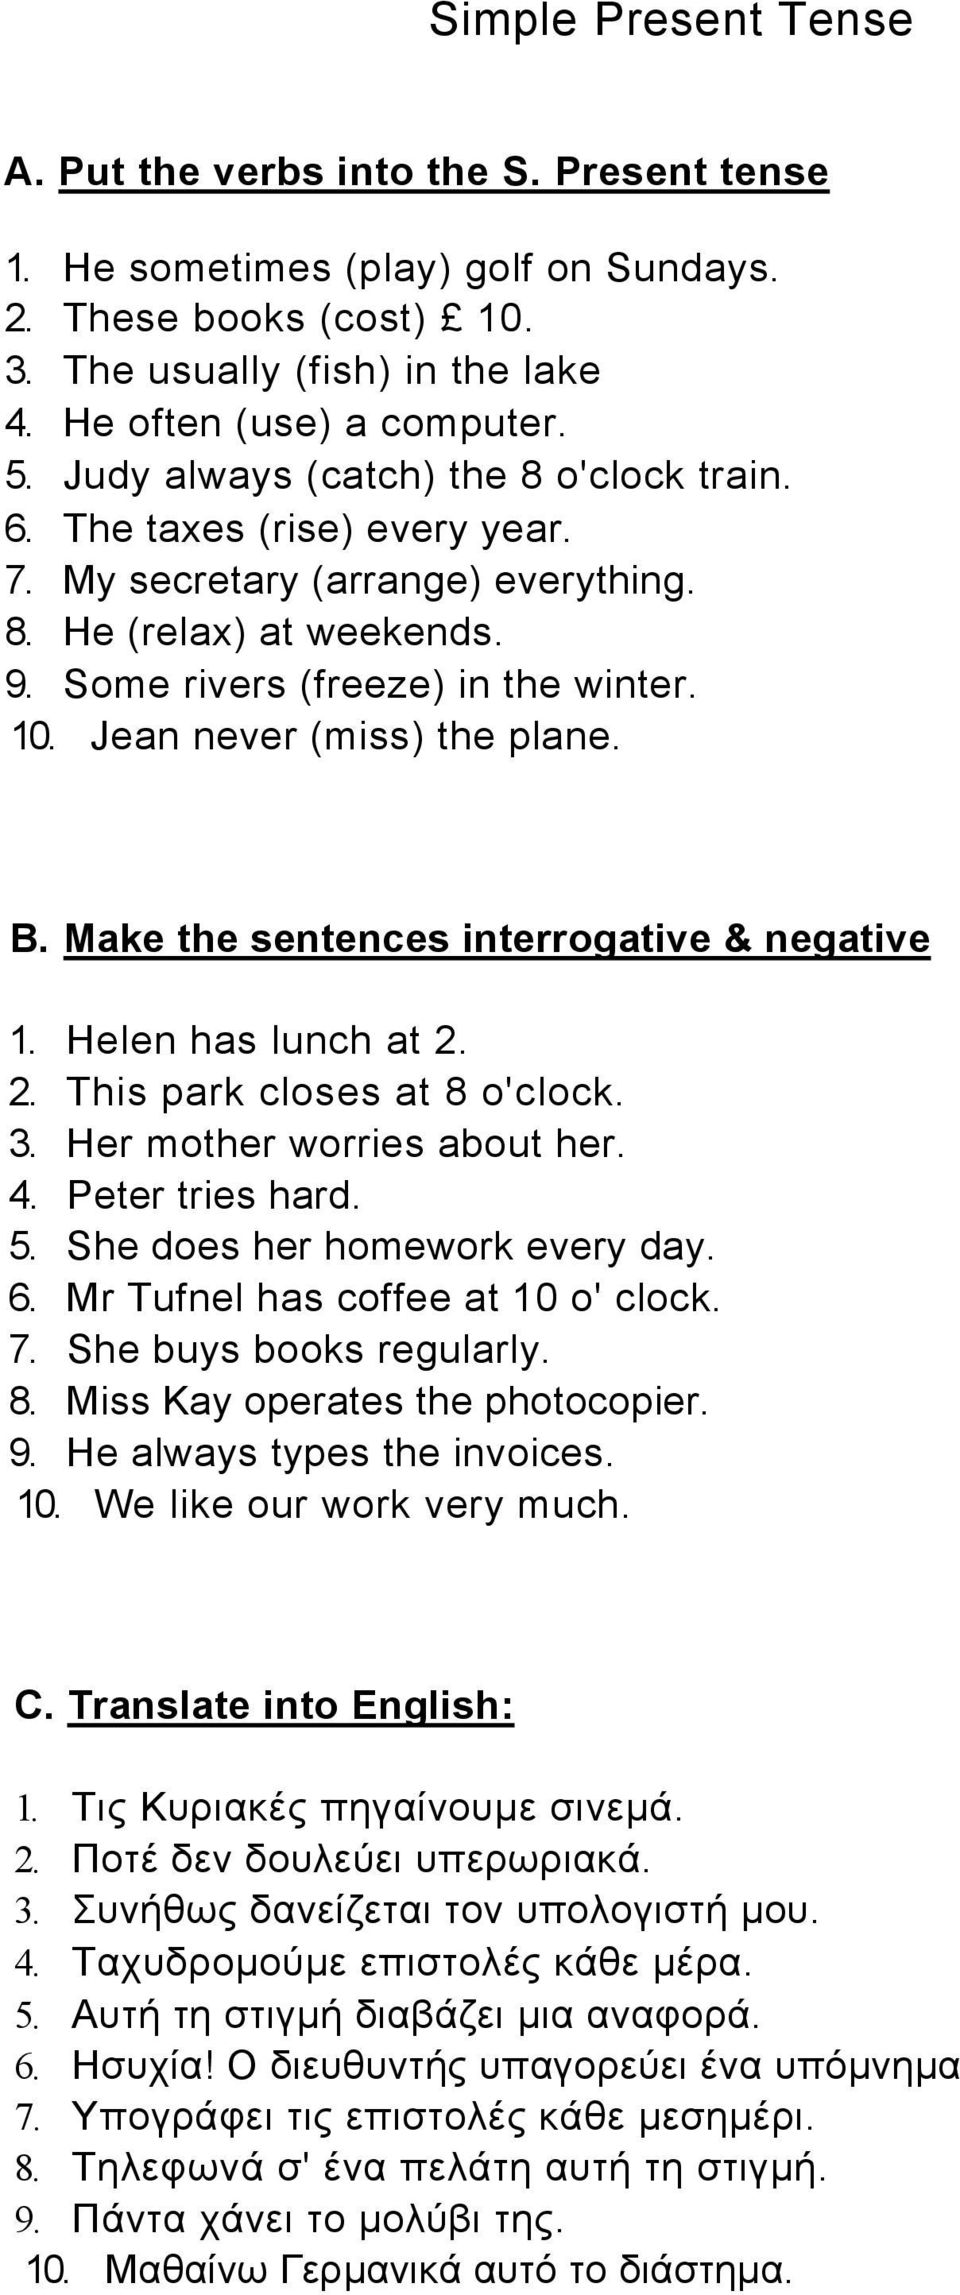 Jean never (miss) the plane. B. Make the sentences interrogative & negative 1. Helen has lunch at 2. 2. This park closes at 8 o'clock. 3. Her mother worries about her. 4. Peter tries hard. 5.